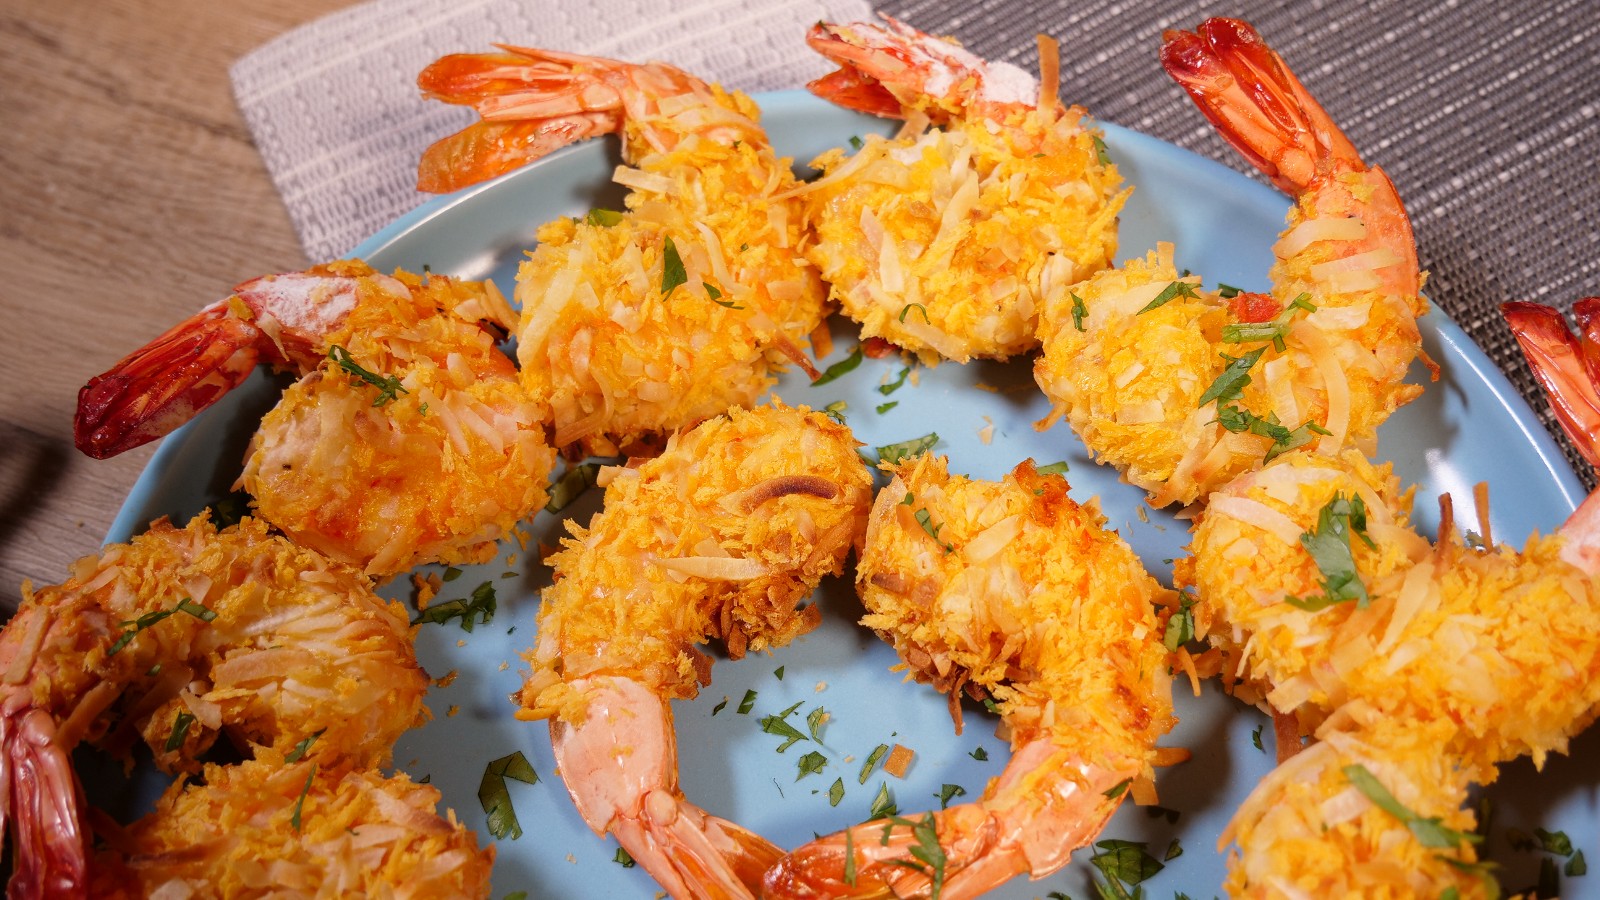 Image of Coconut Shrimp in an Air fryer